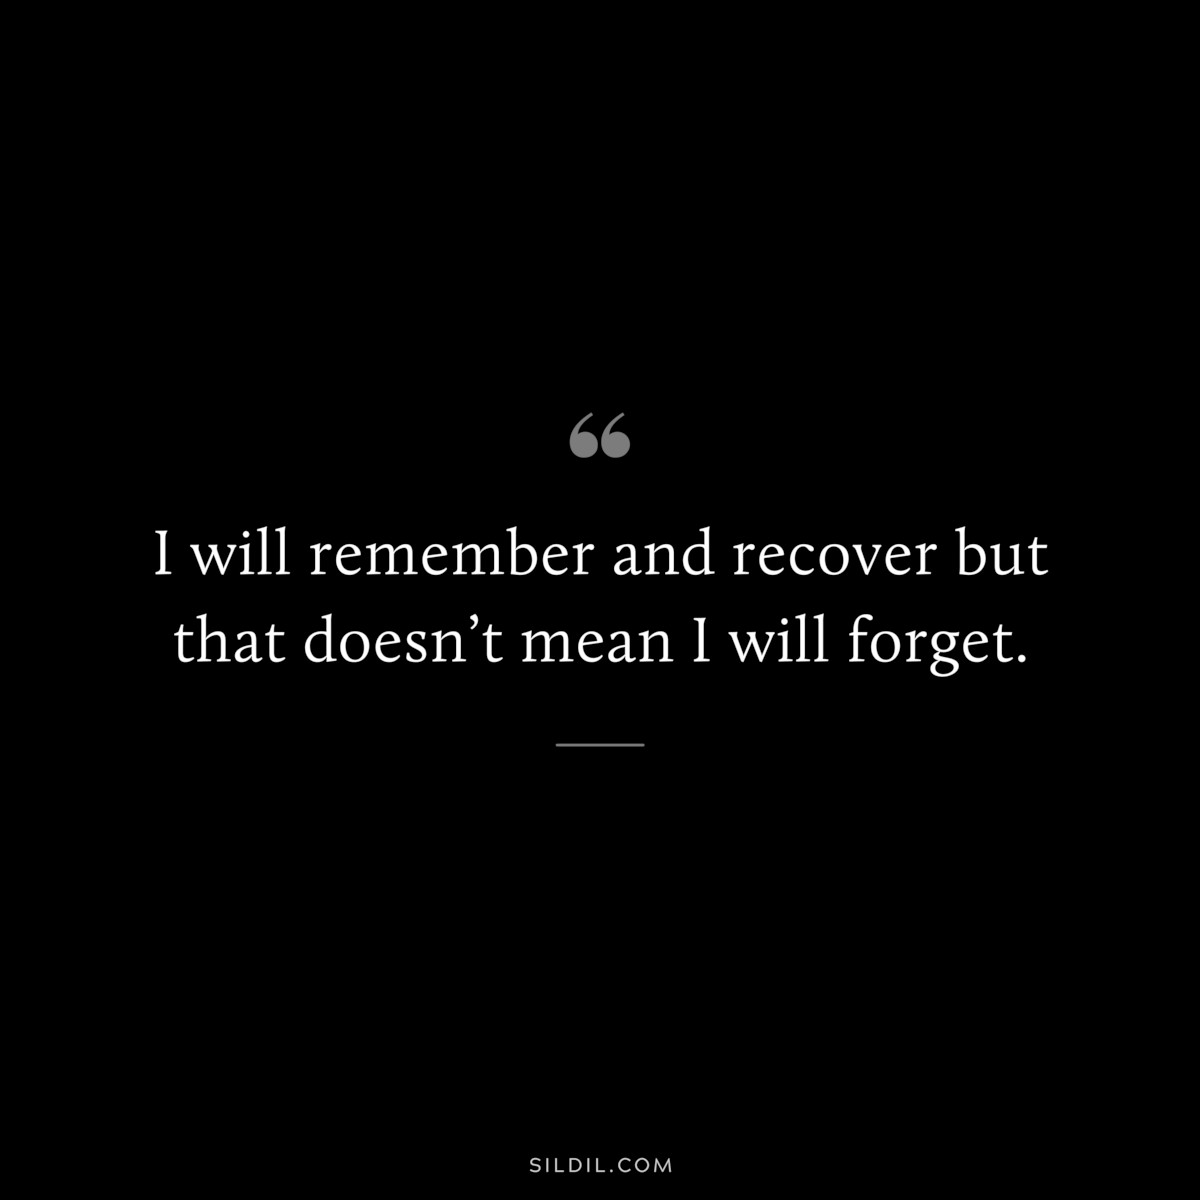 I will remember and recover but that doesn’t mean I will forget.